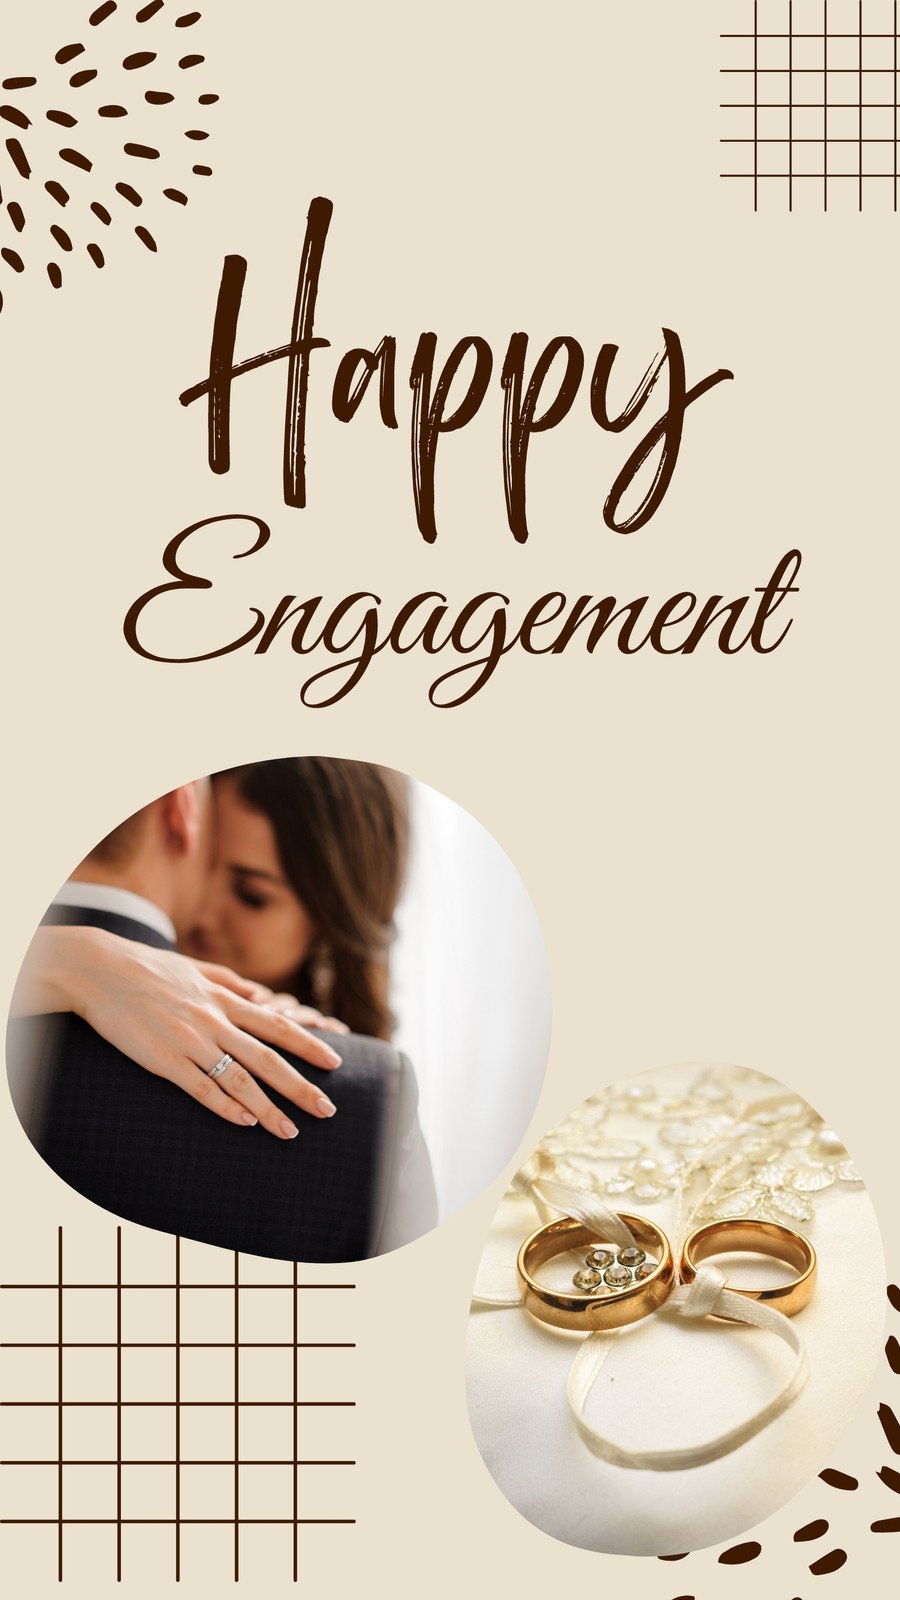 Happy Engagement Day | Engagement wishes, Happy engagement, Engagement  quotes